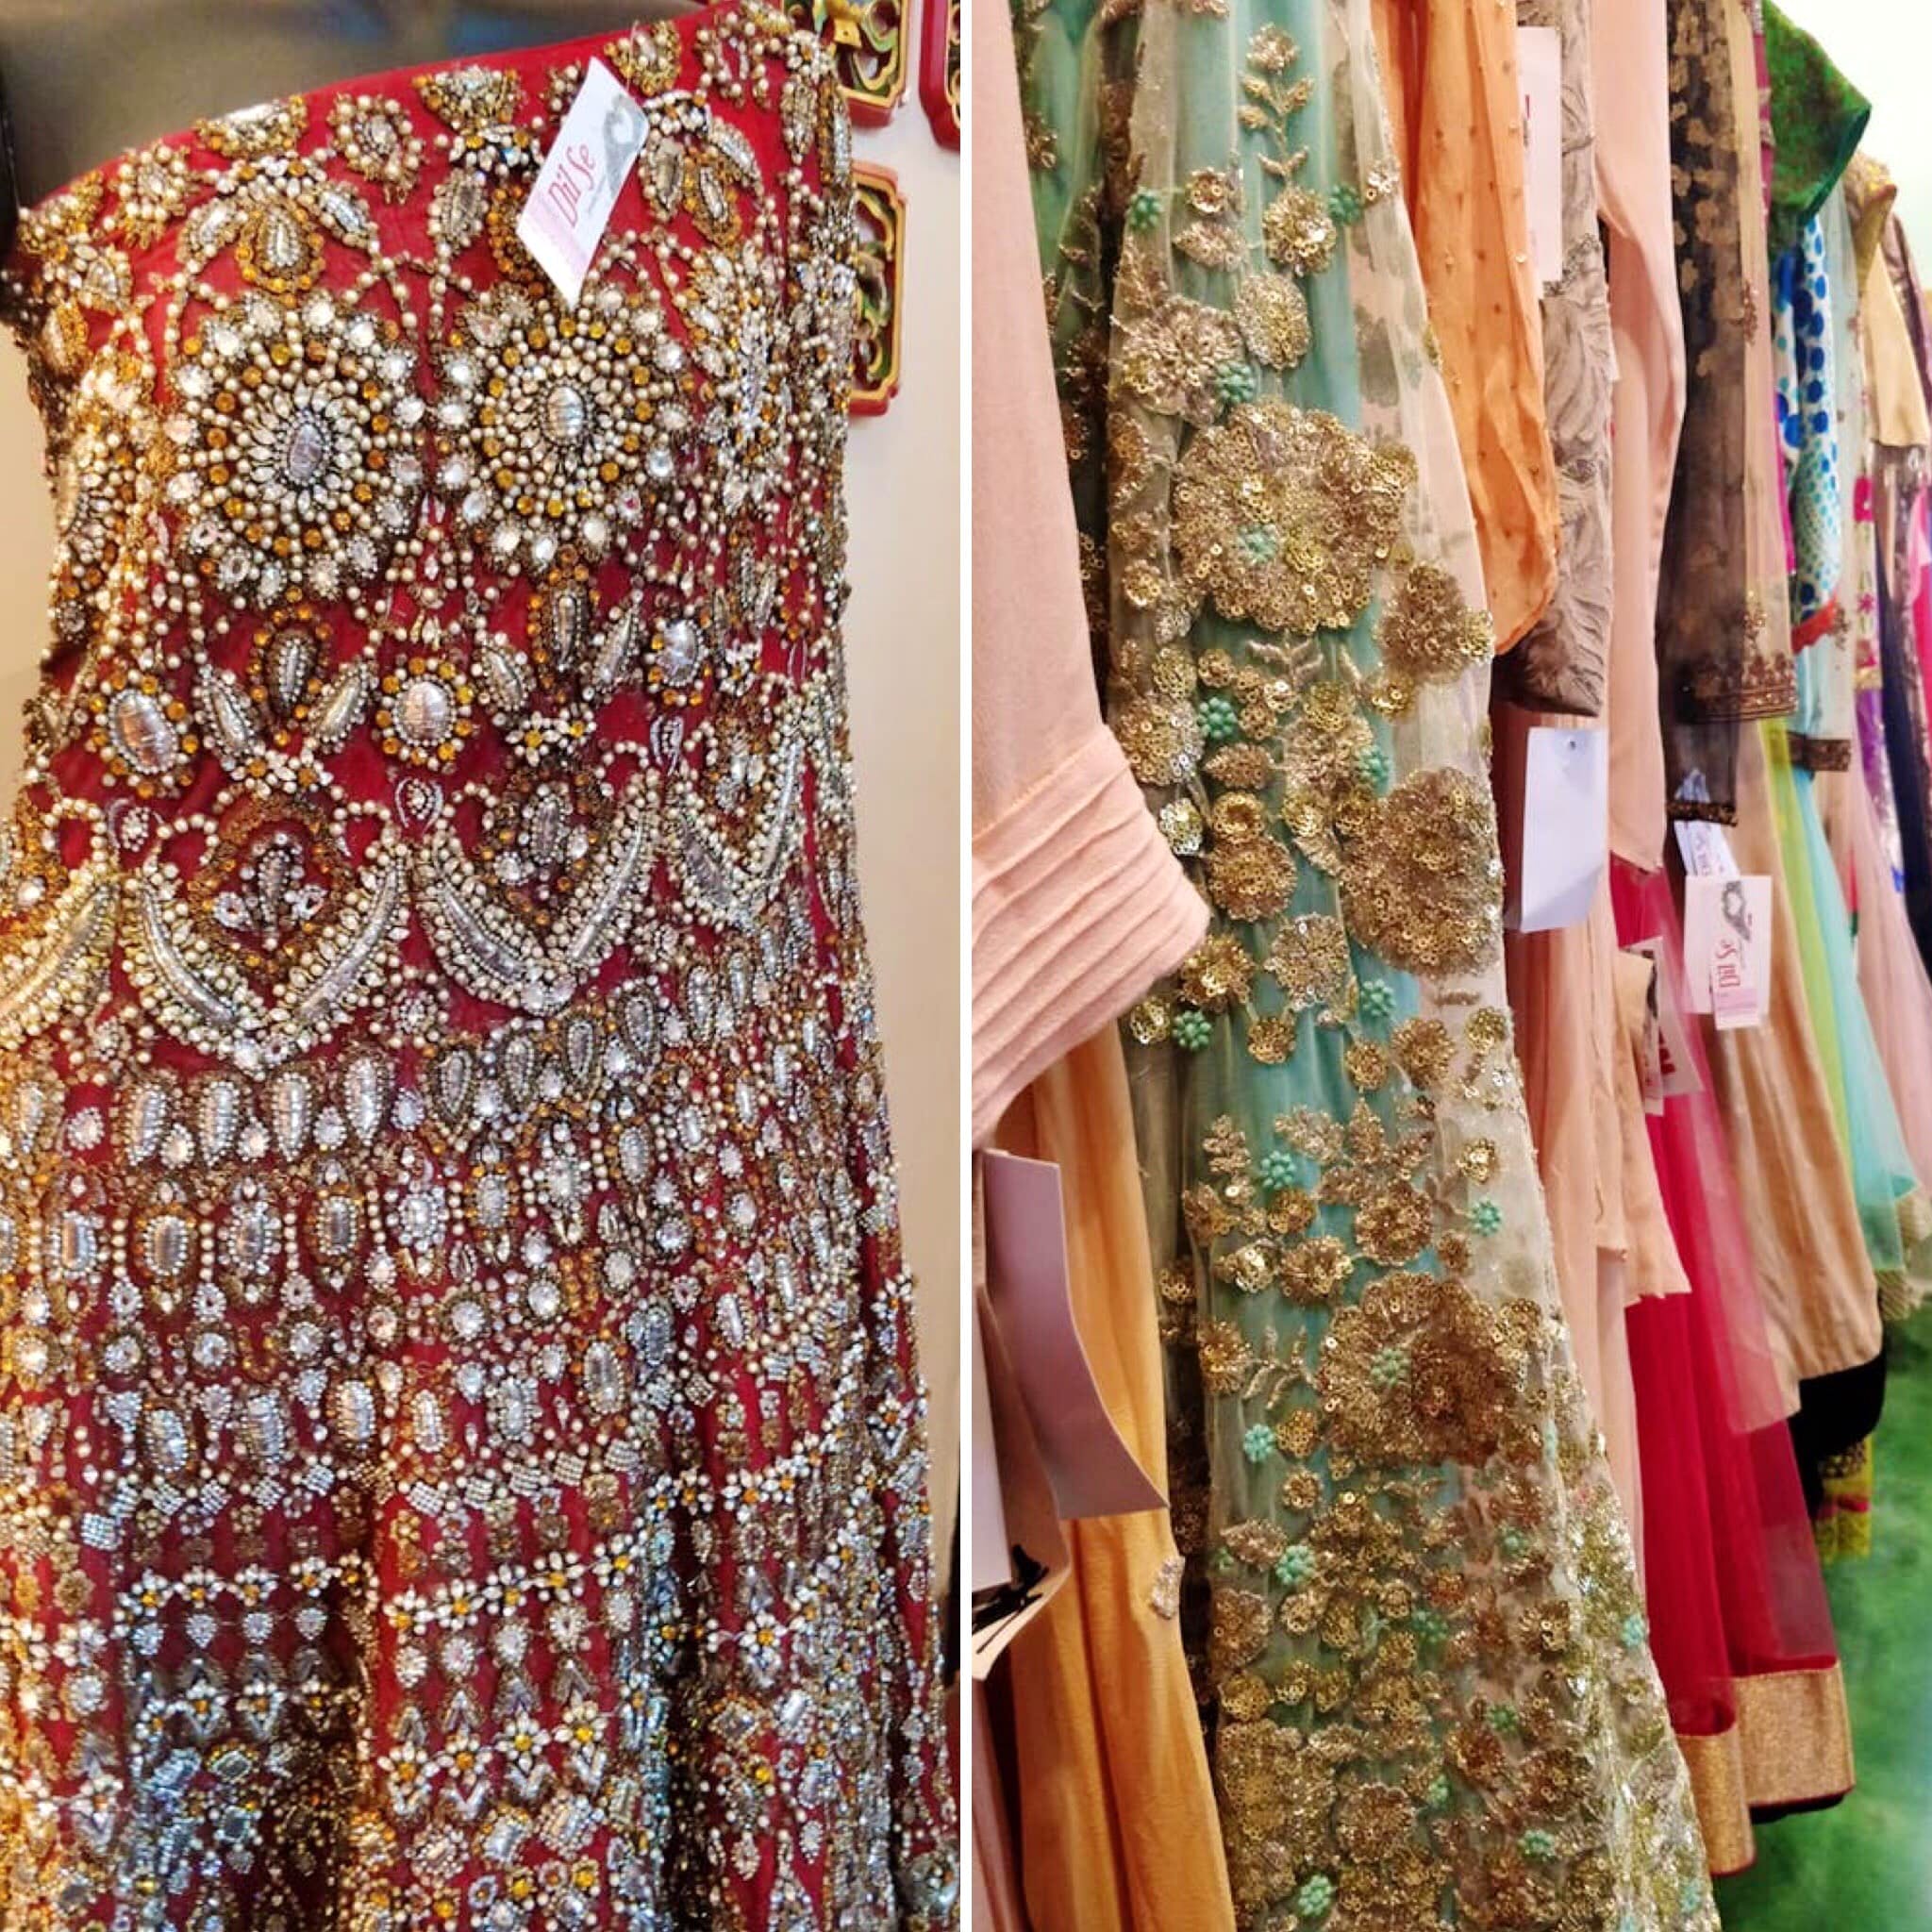 Buy Designer Garments At One-Fourth Prices & Contribute To A Greater Cause